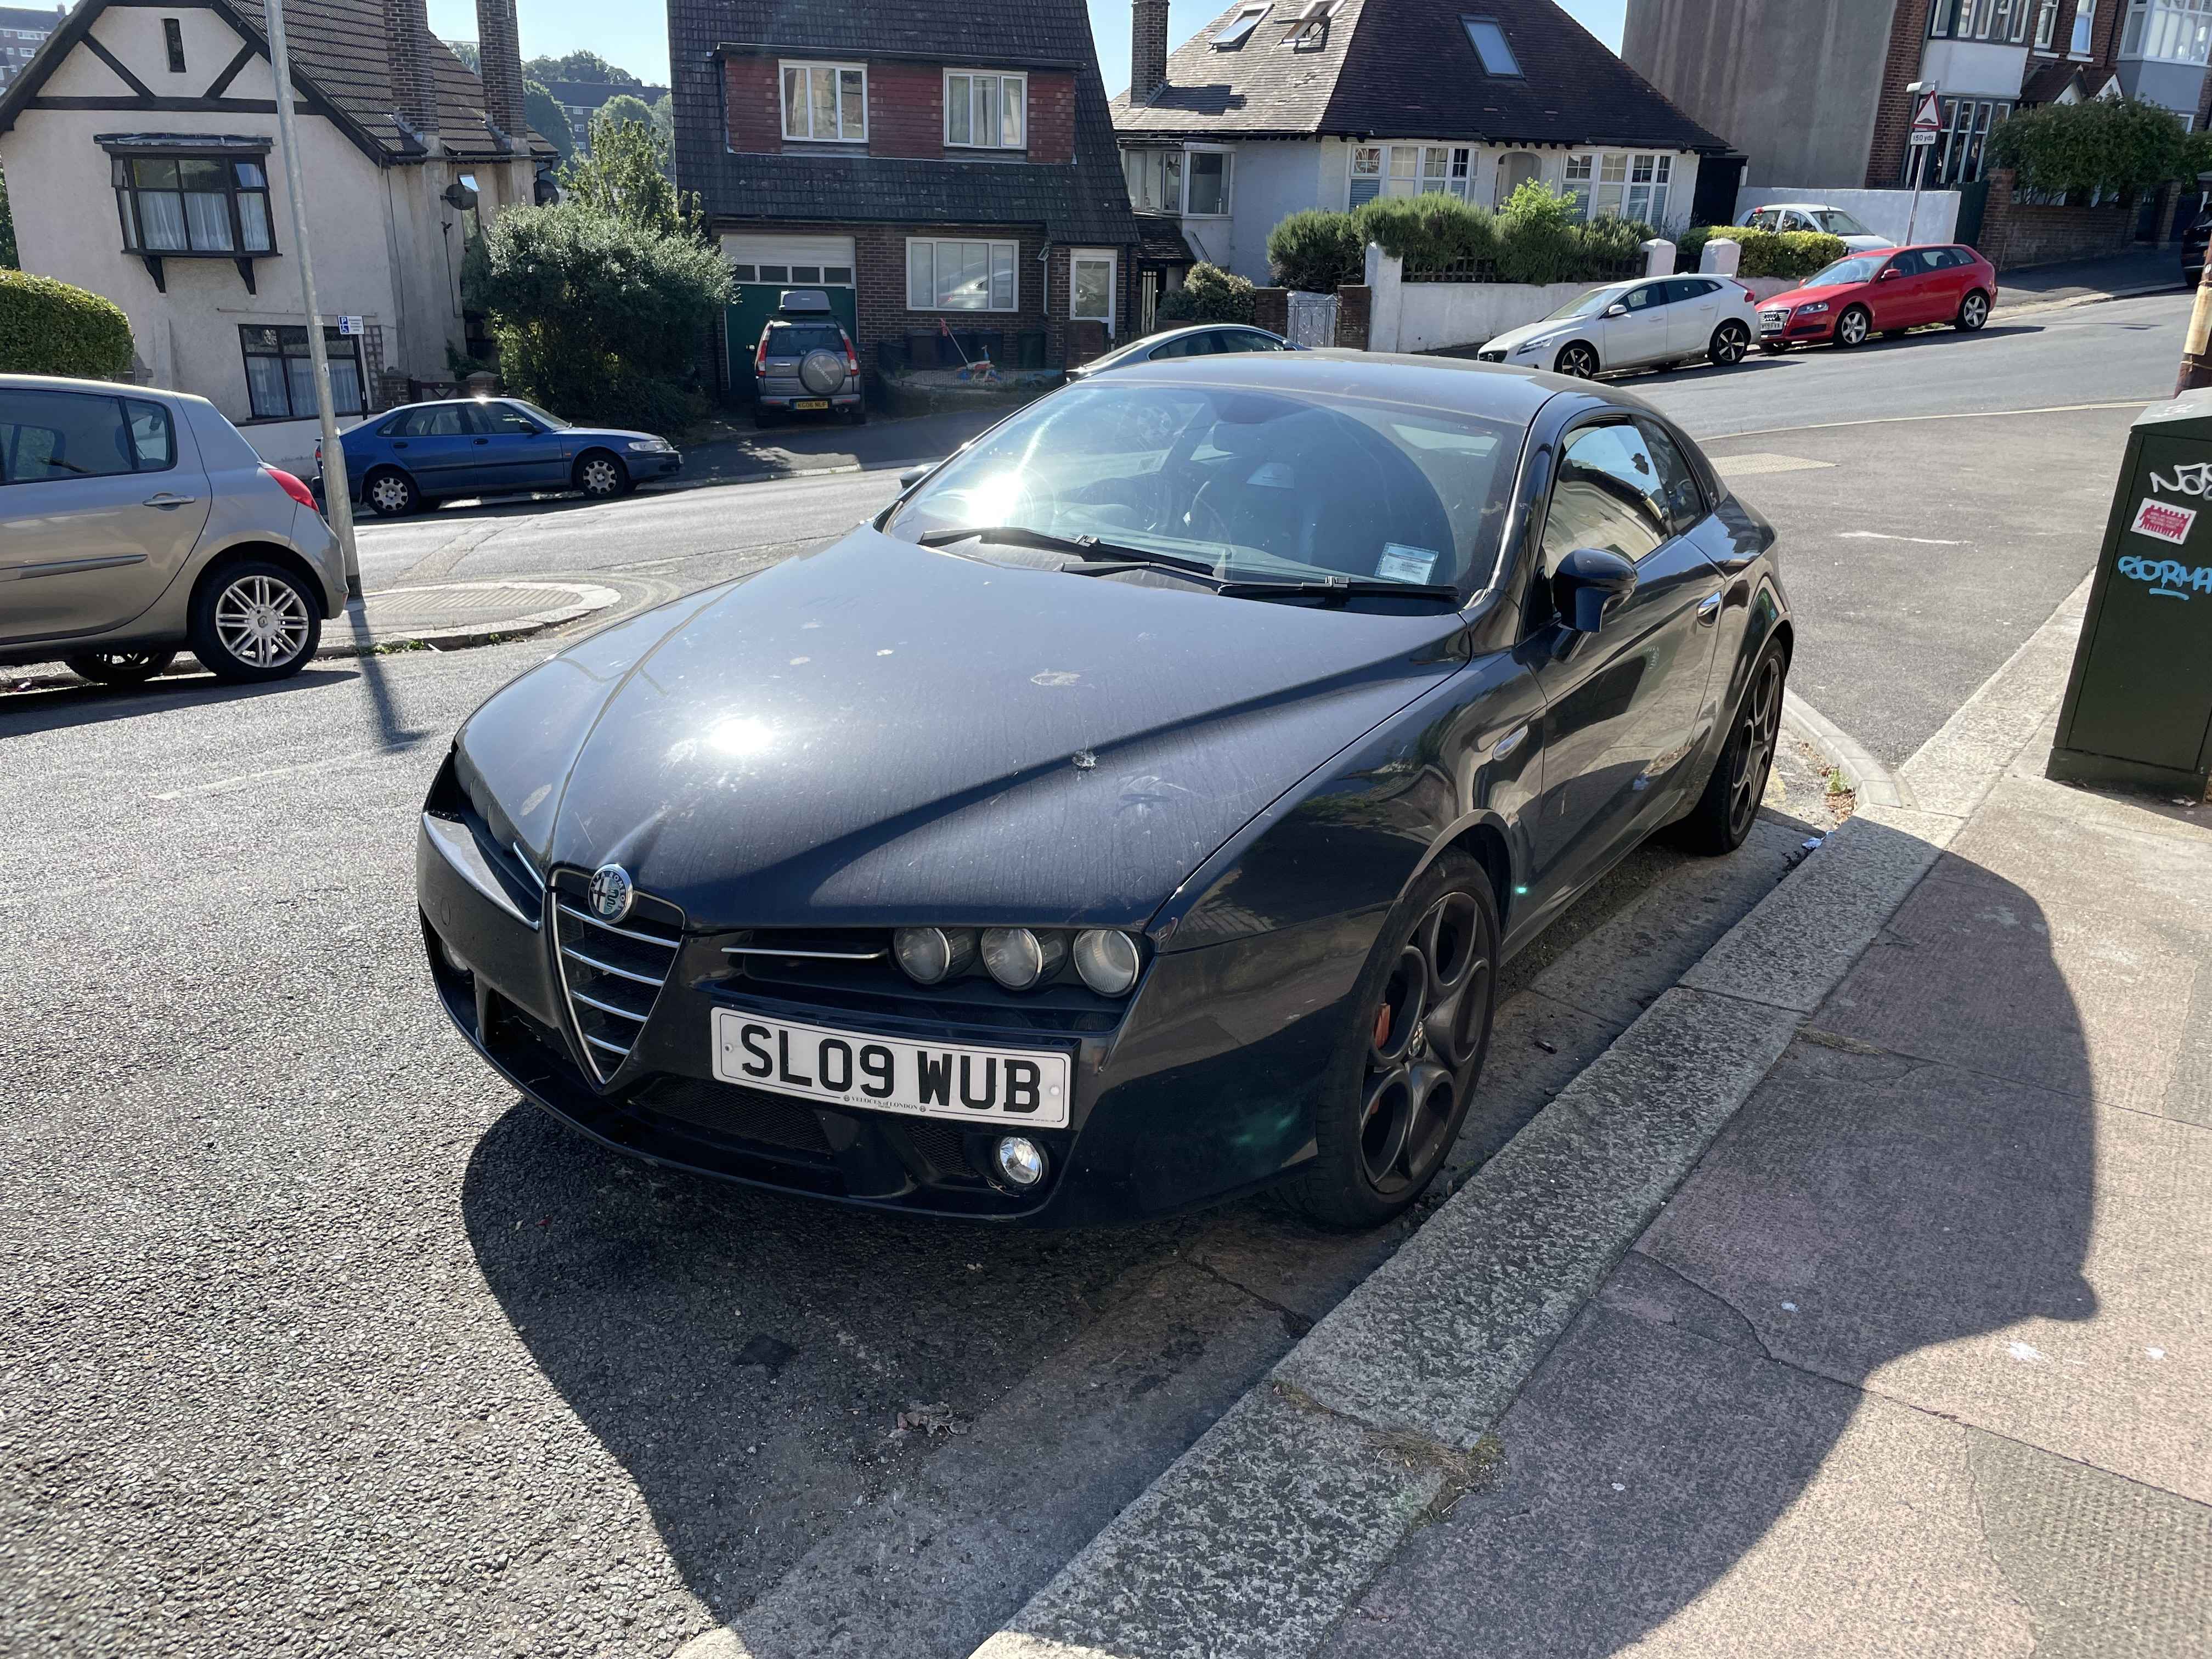 Photograph of SL09 WUB - a Black Alfa Romeo Brera parked in Hollingdean by a non-resident. The eighth of twenty photographs supplied by the residents of Hollingdean.